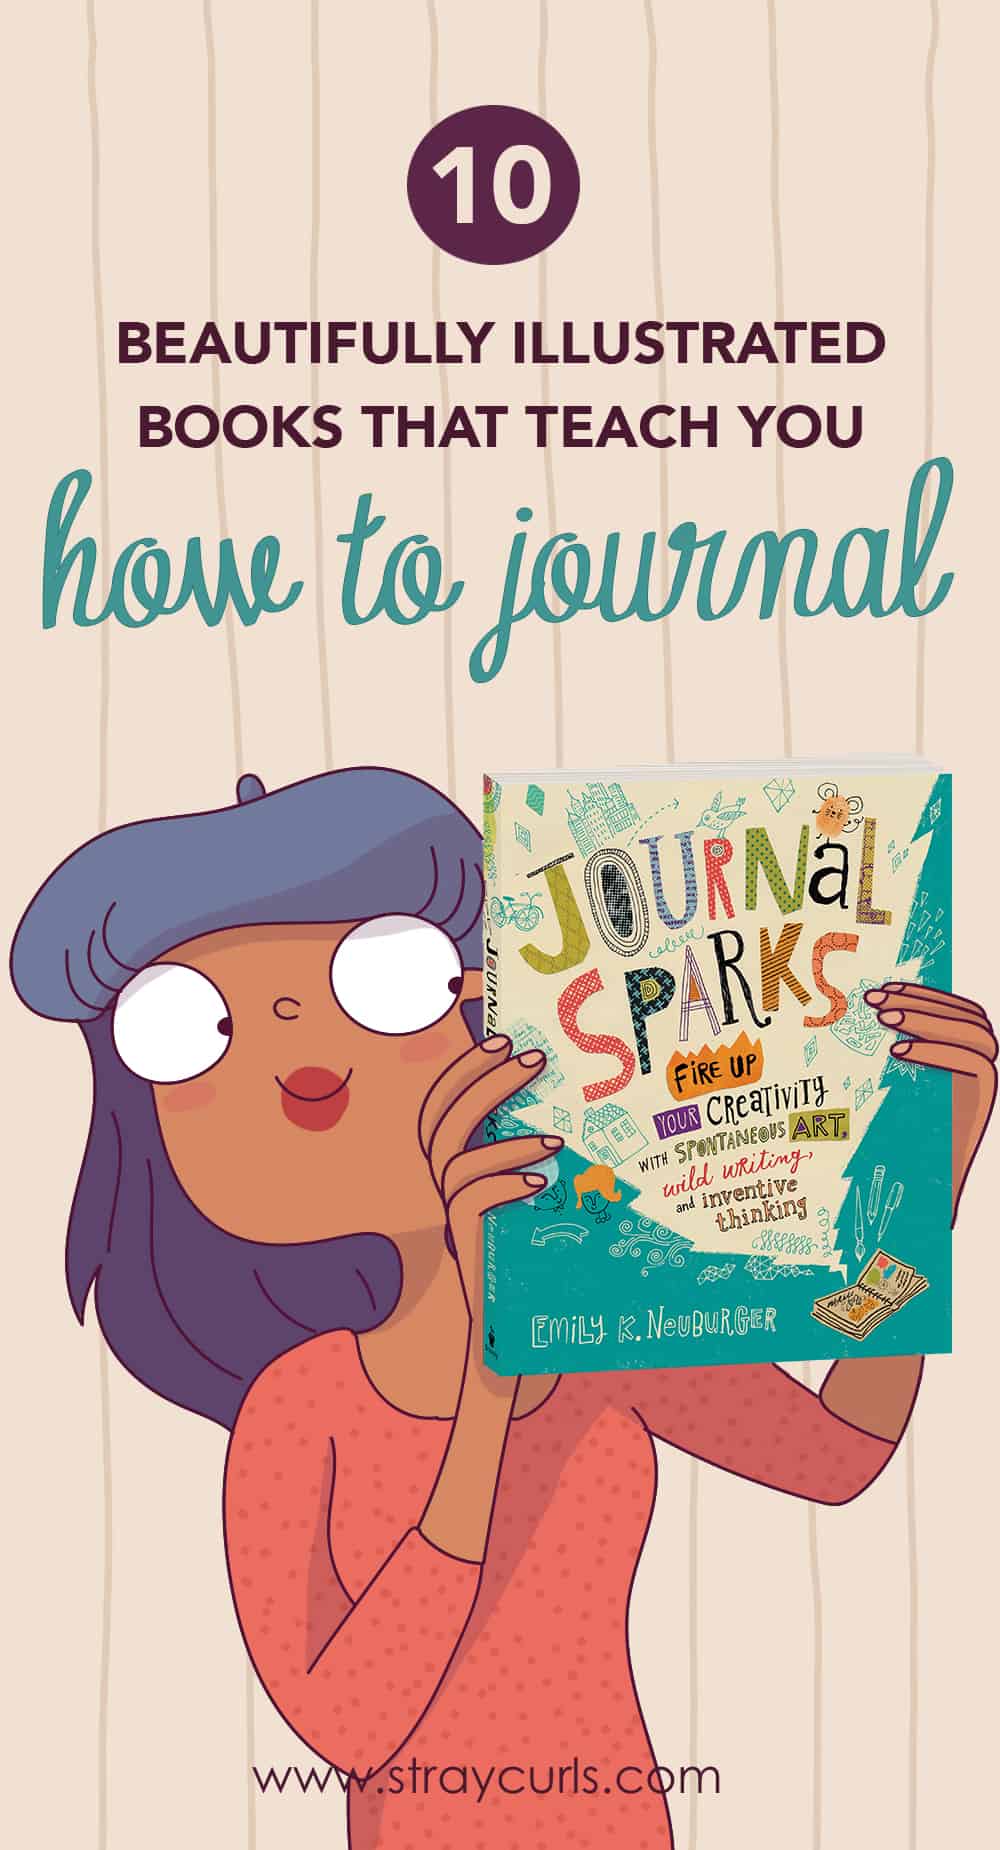 Love to journal? Click to see the different books that will teach you a variety of journaling techniques! Learn to draw daily elements, dot journaling, and so much more. The ultimate guide to learning how to journal!